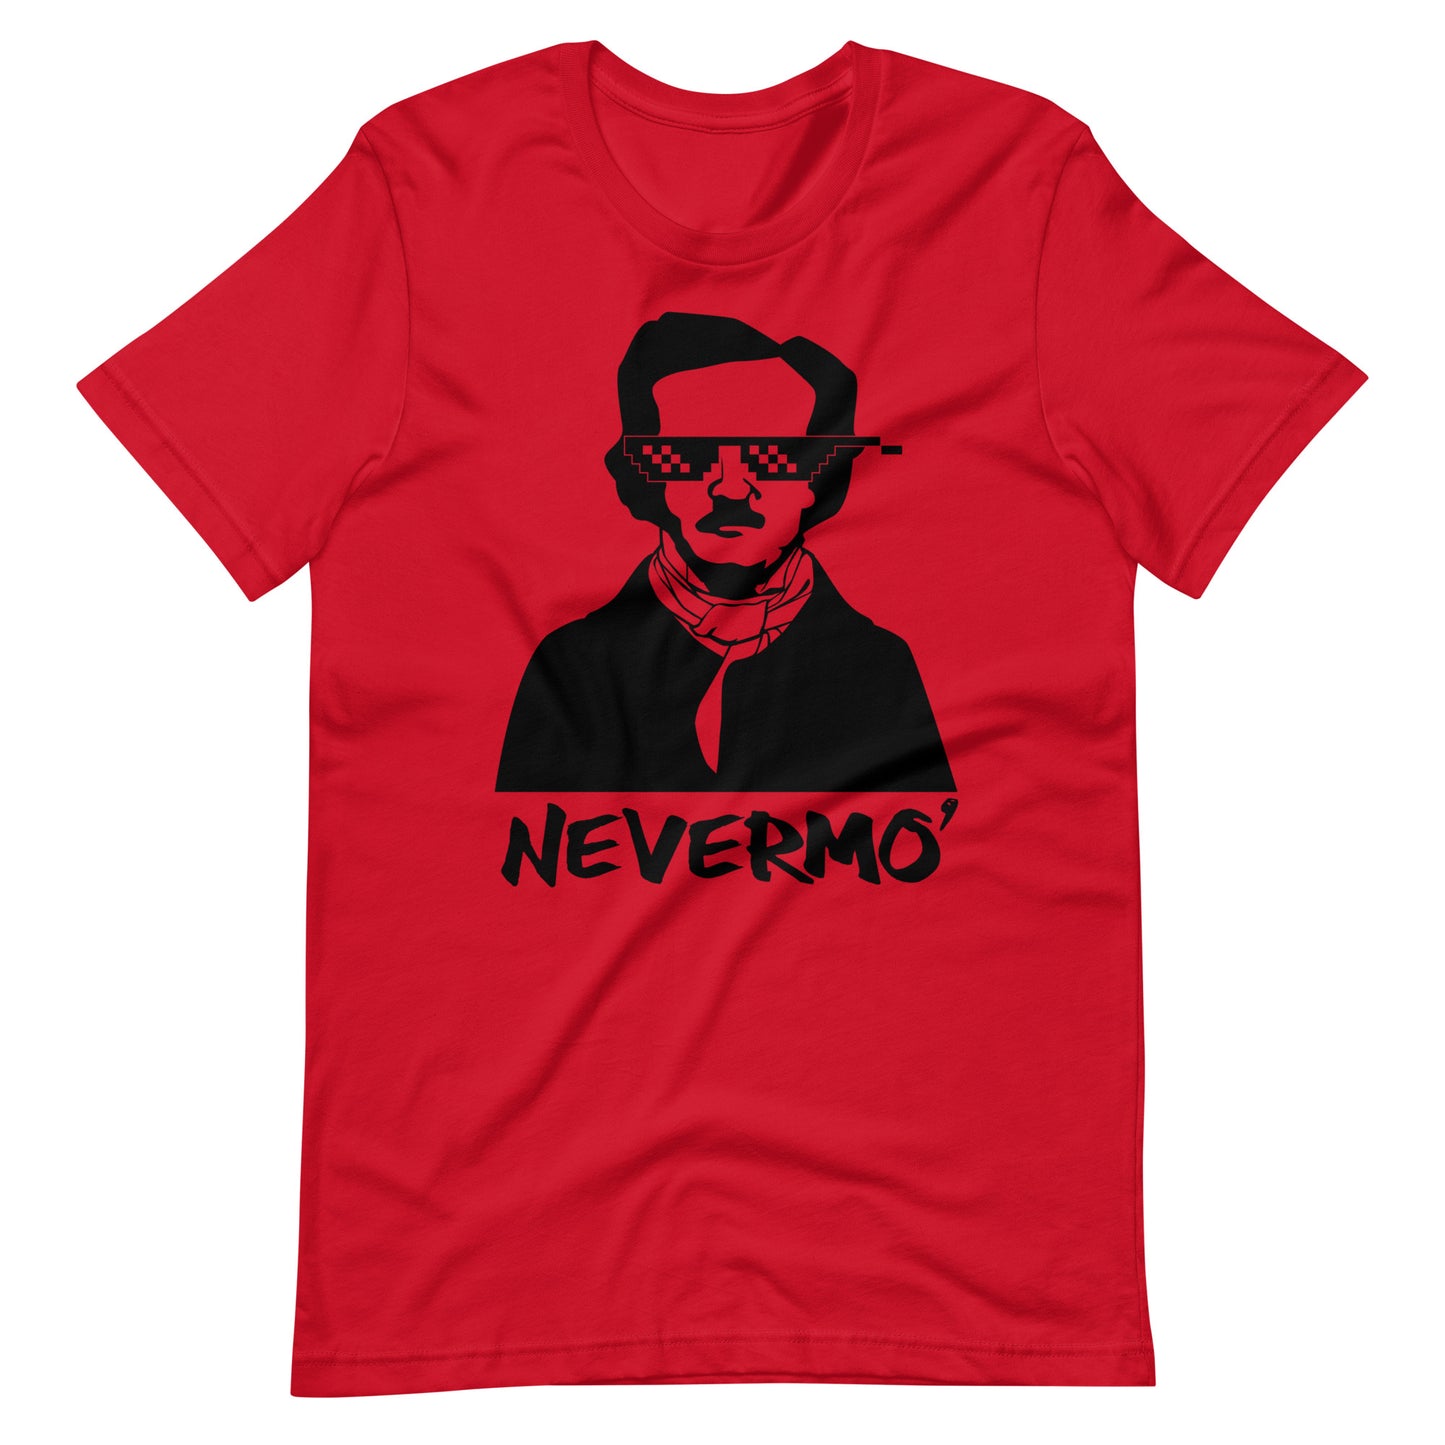 Men's Edgar Allan Poe "The Nevermo" T-Shirt - Red Front